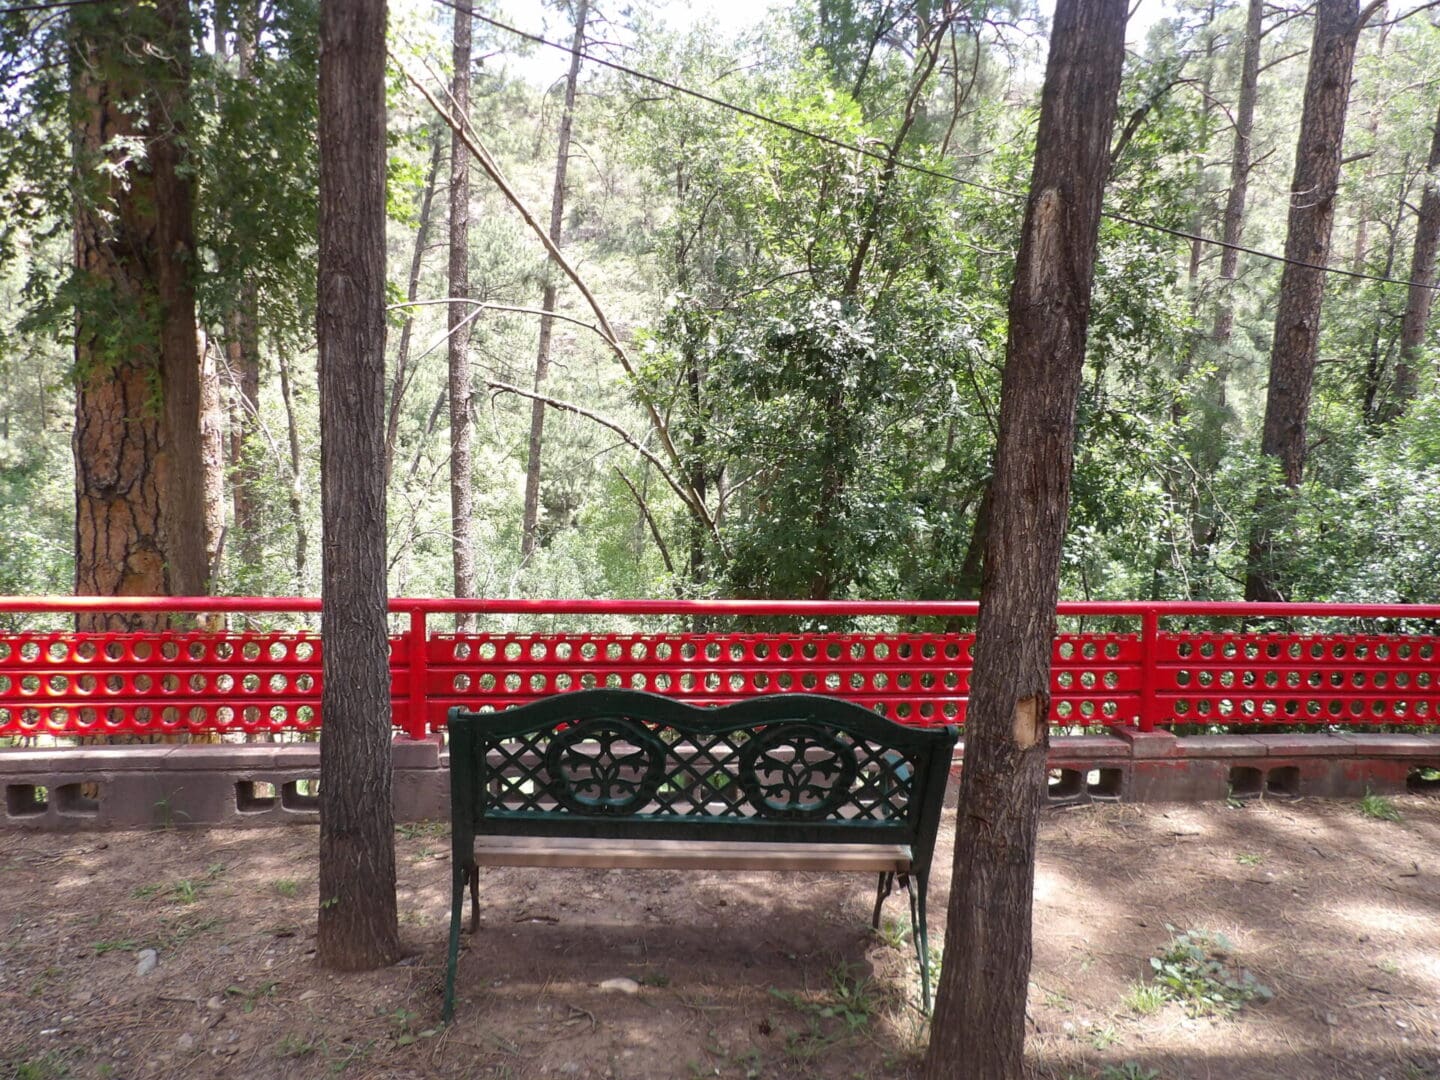 A bench in the middle of some trees